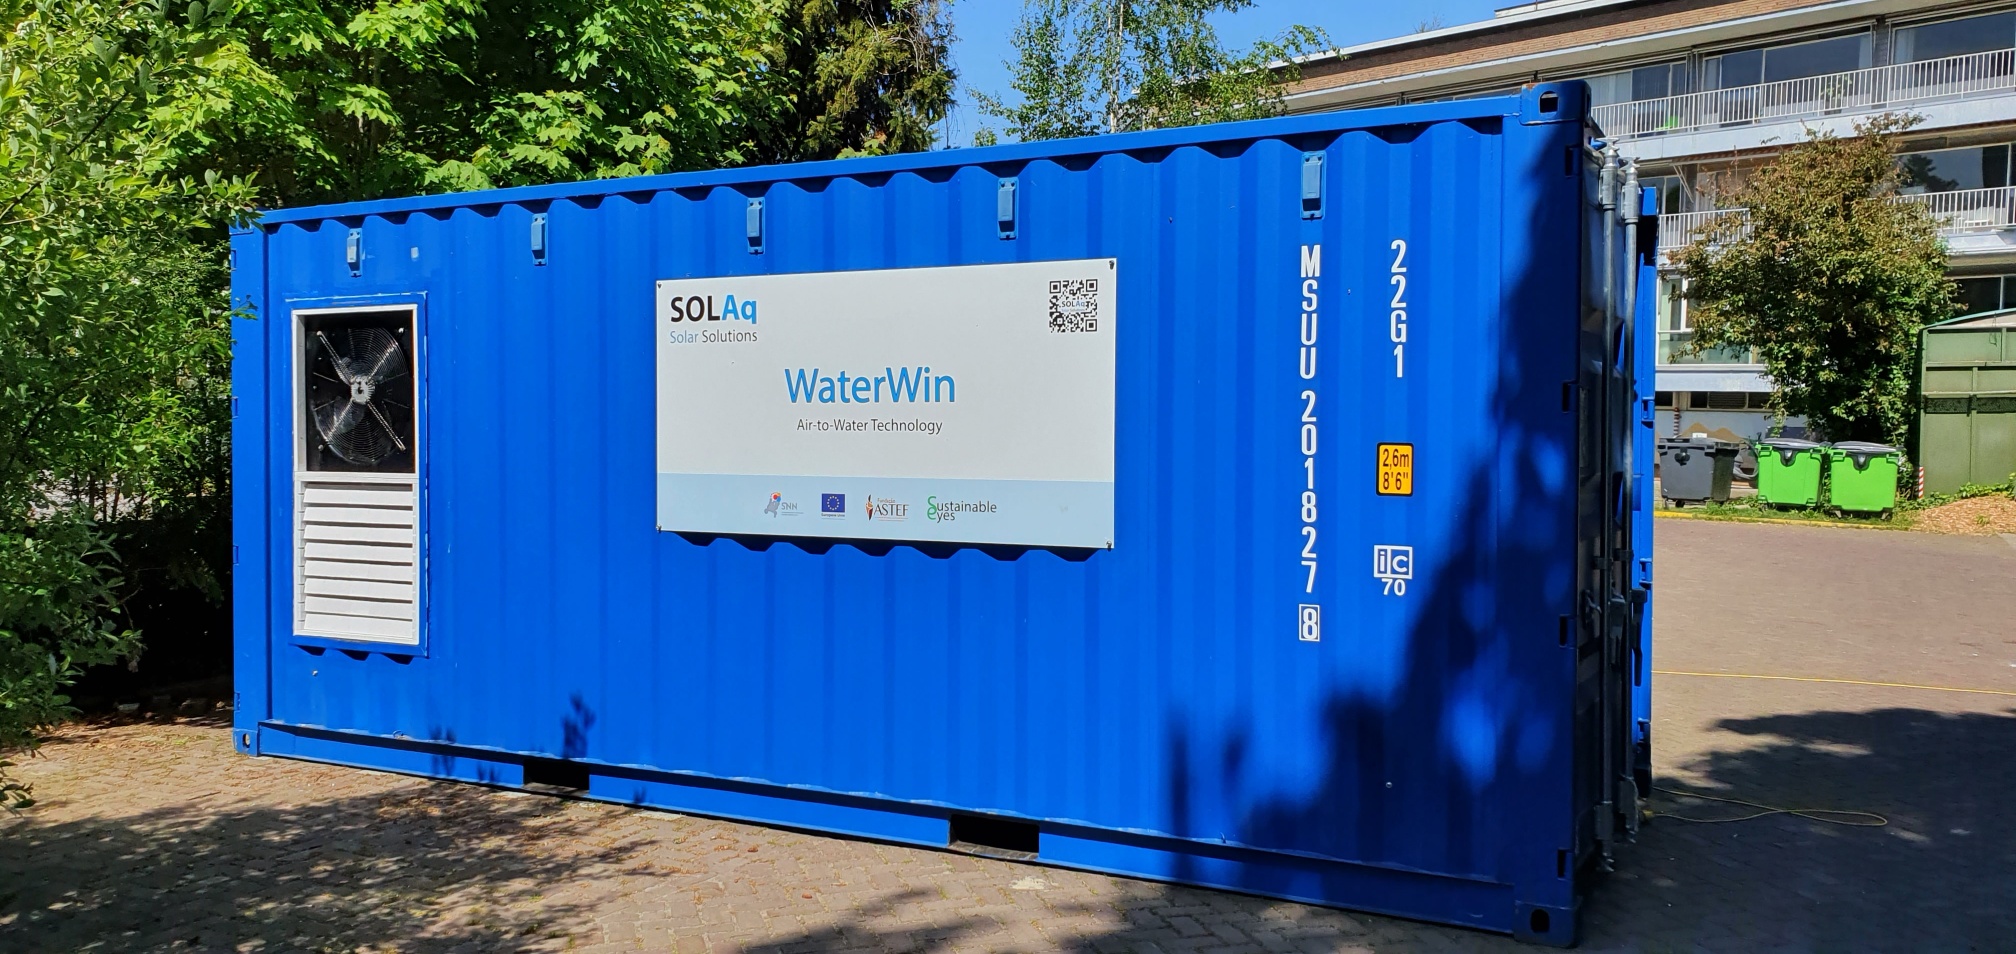 WaterWin prototype unit in the Netherlands